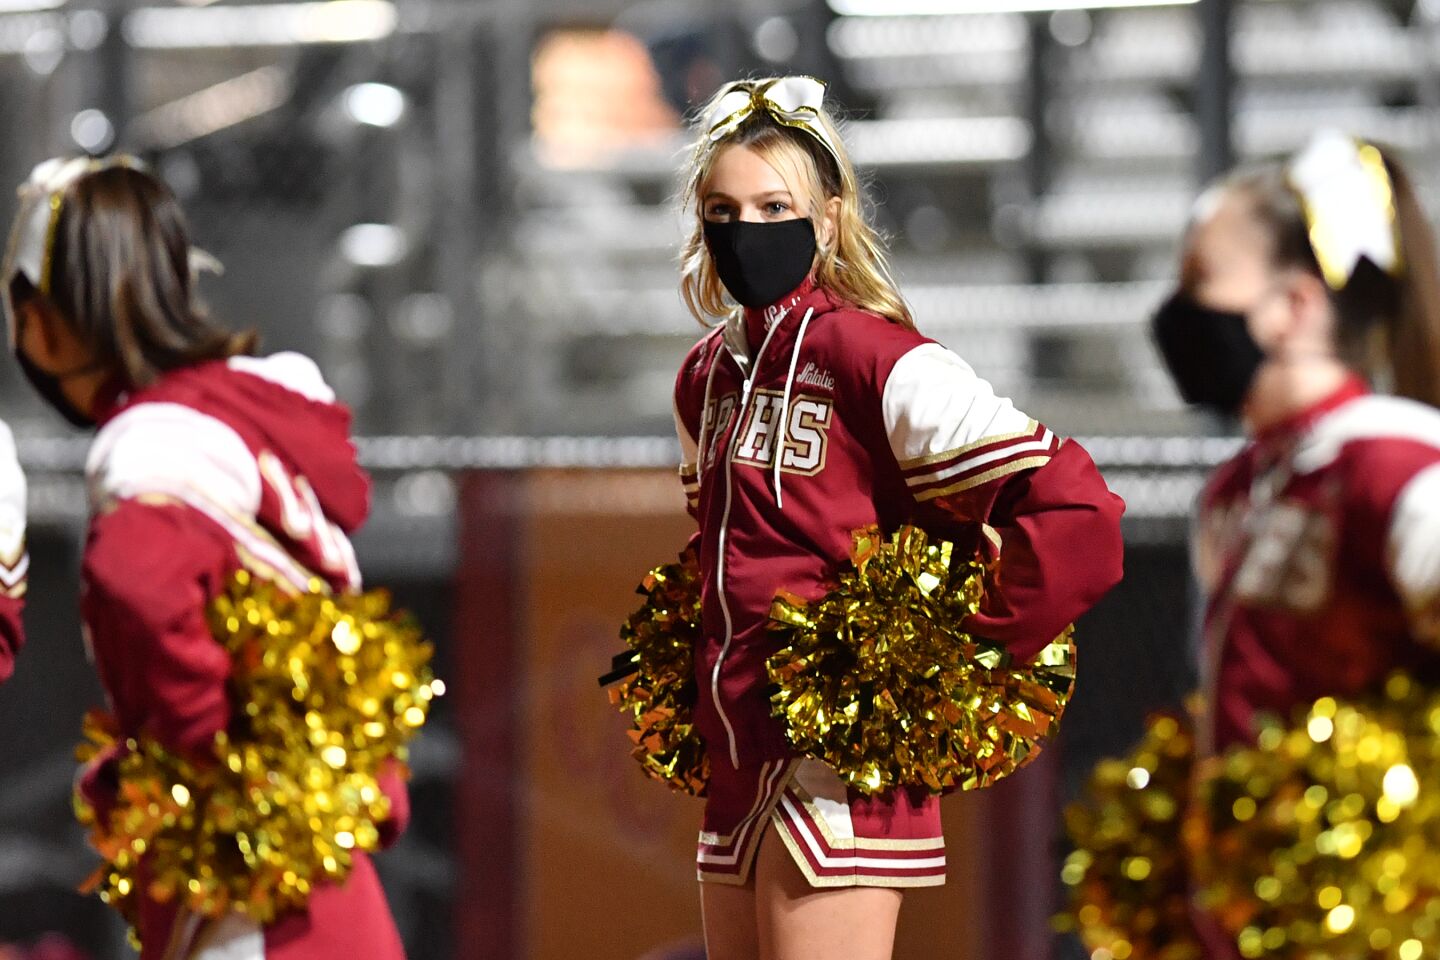 Cheerleaders wore masks to root on the squad.